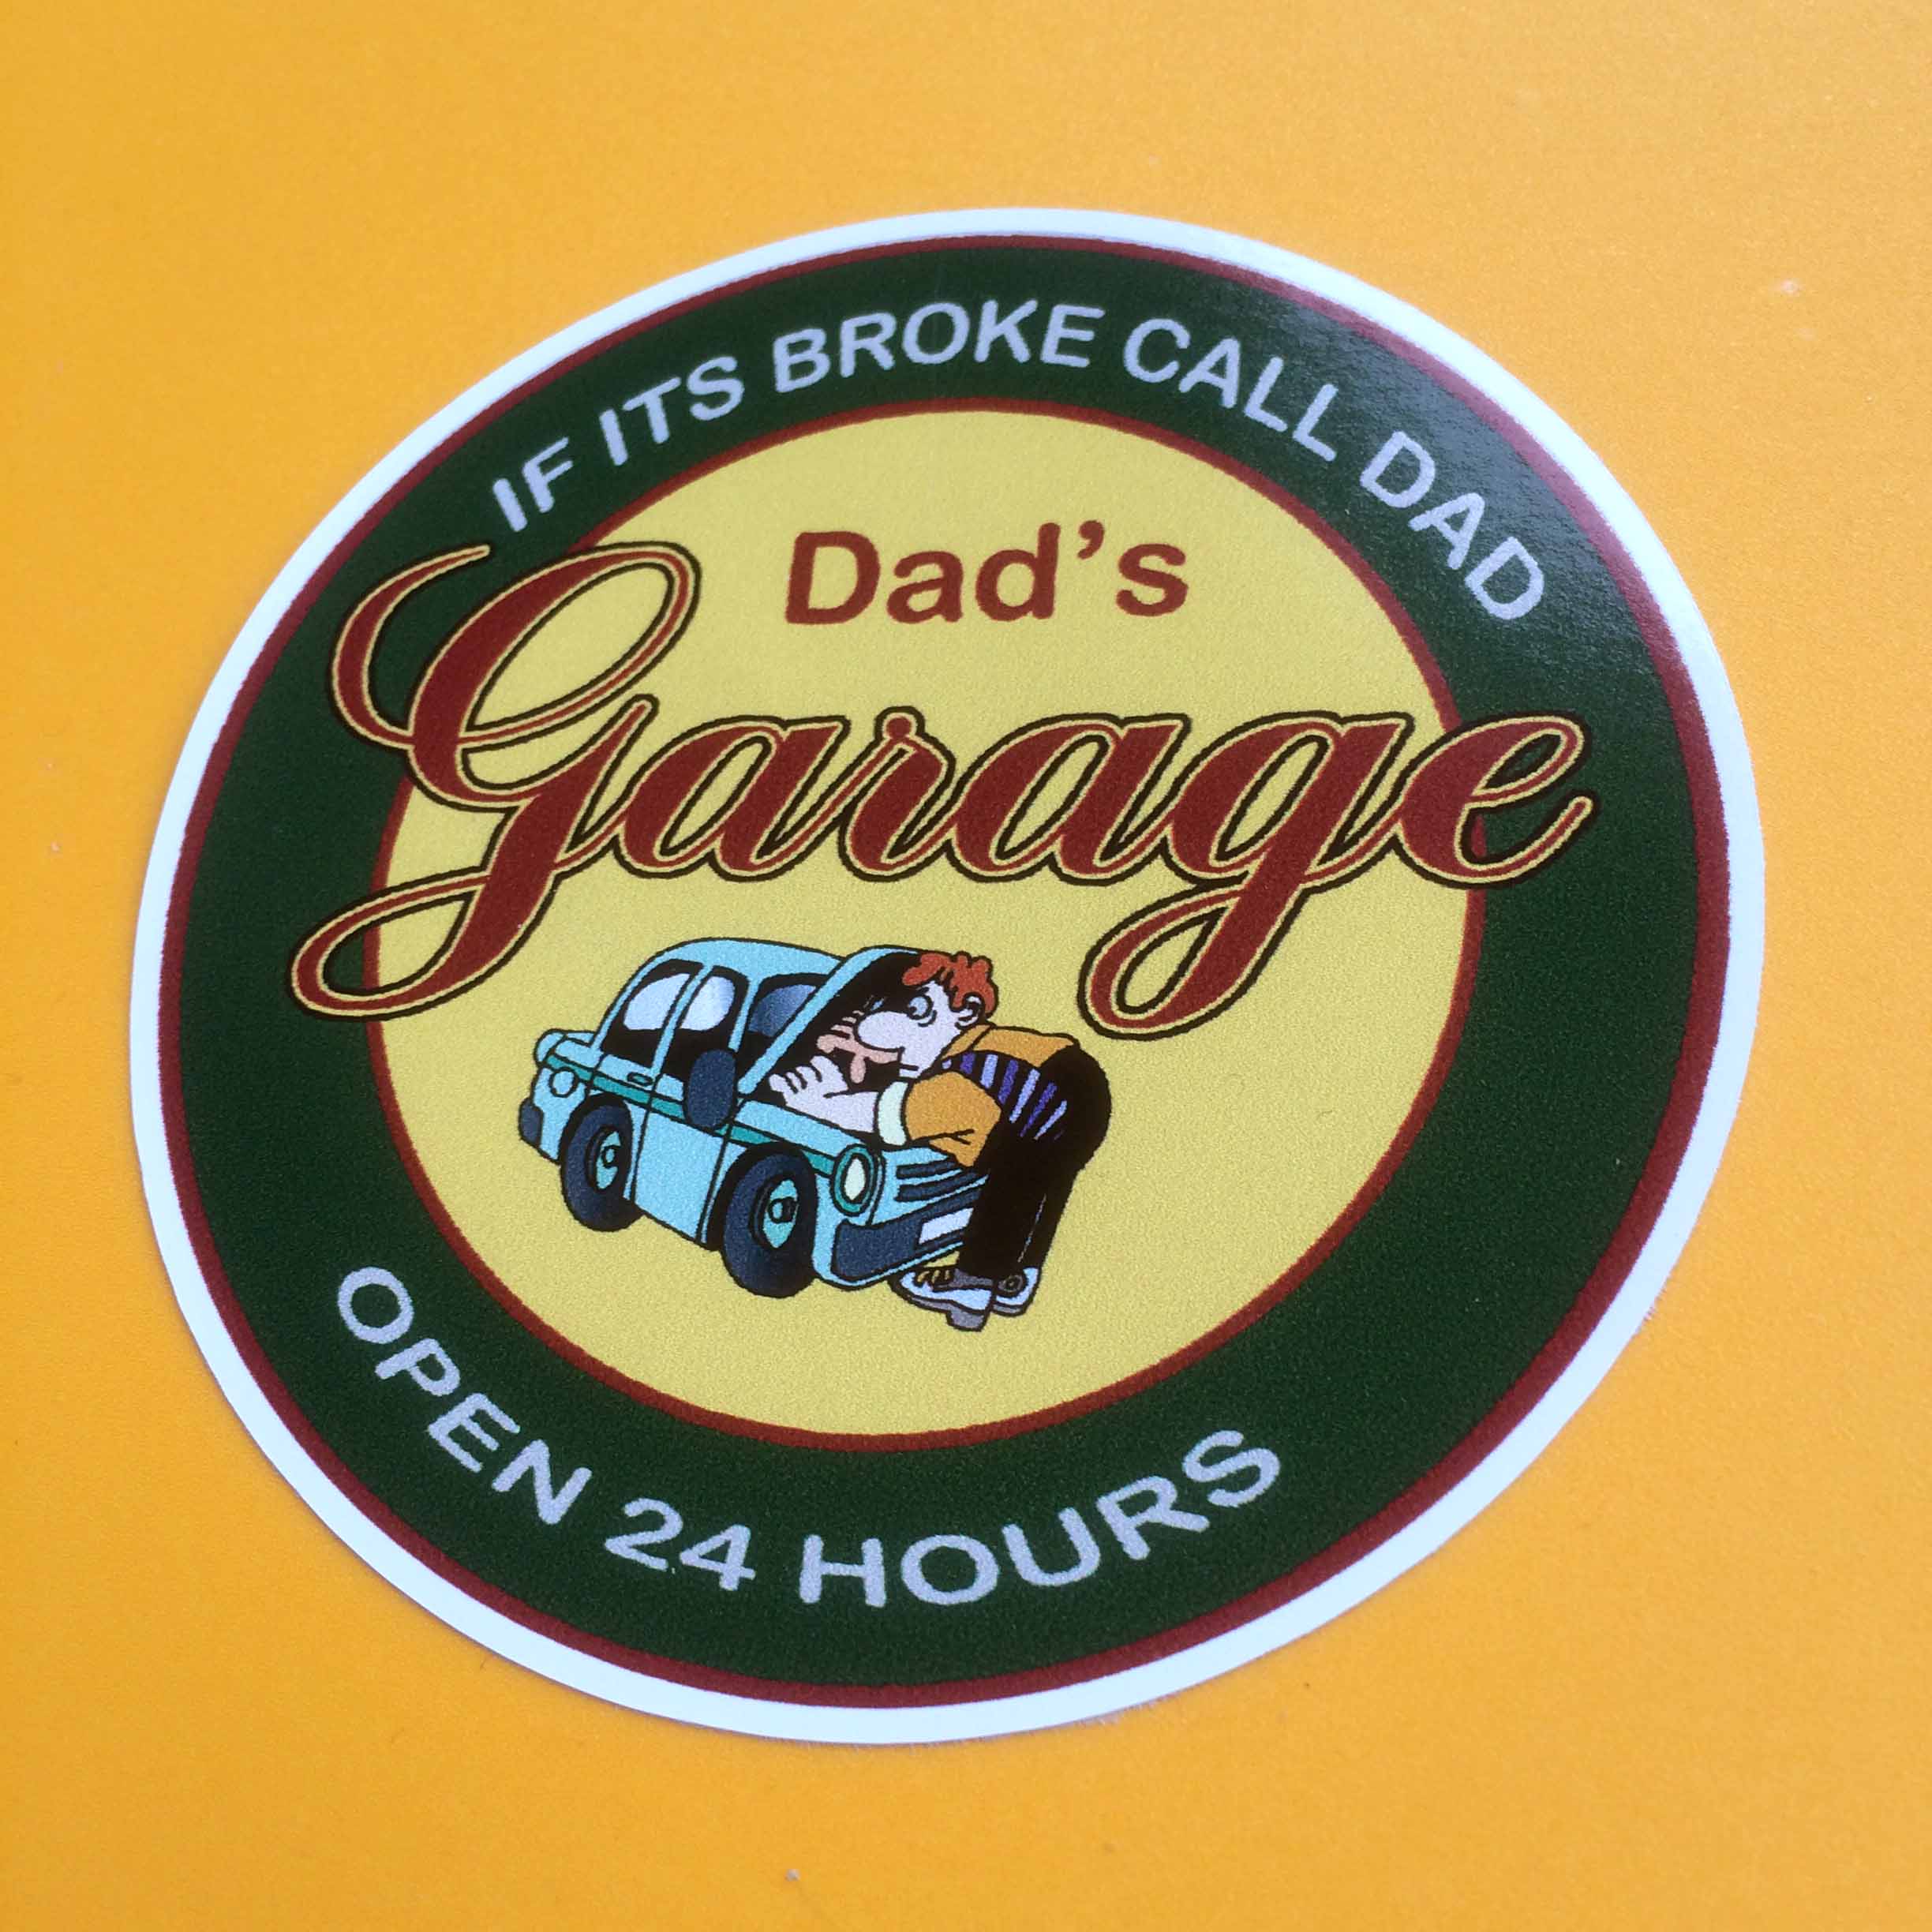 Dad's Garage in burgundy lettering and a cartoon character dressed in shirt, tie and trousers working under the bonnet of a blue car on a yellow circular sticker. If it's broke call dad open 24 hours in white lettering surrounds this on a green border.